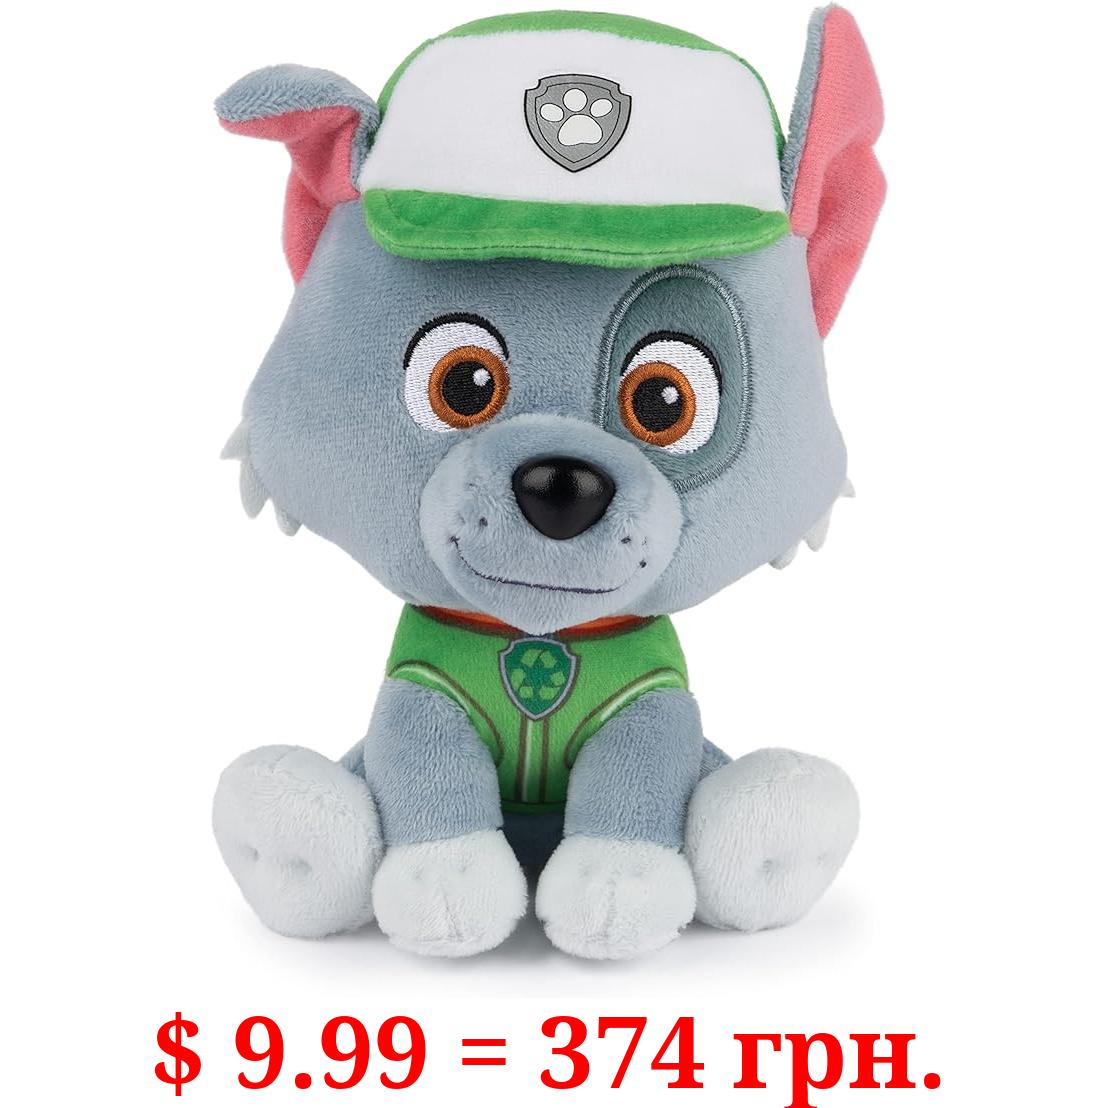 GUND Official PAW Patrol Rocky in Signature Recycling Uniform Plush Toy, Stuffed Animal for Ages 1 and Up, 6"